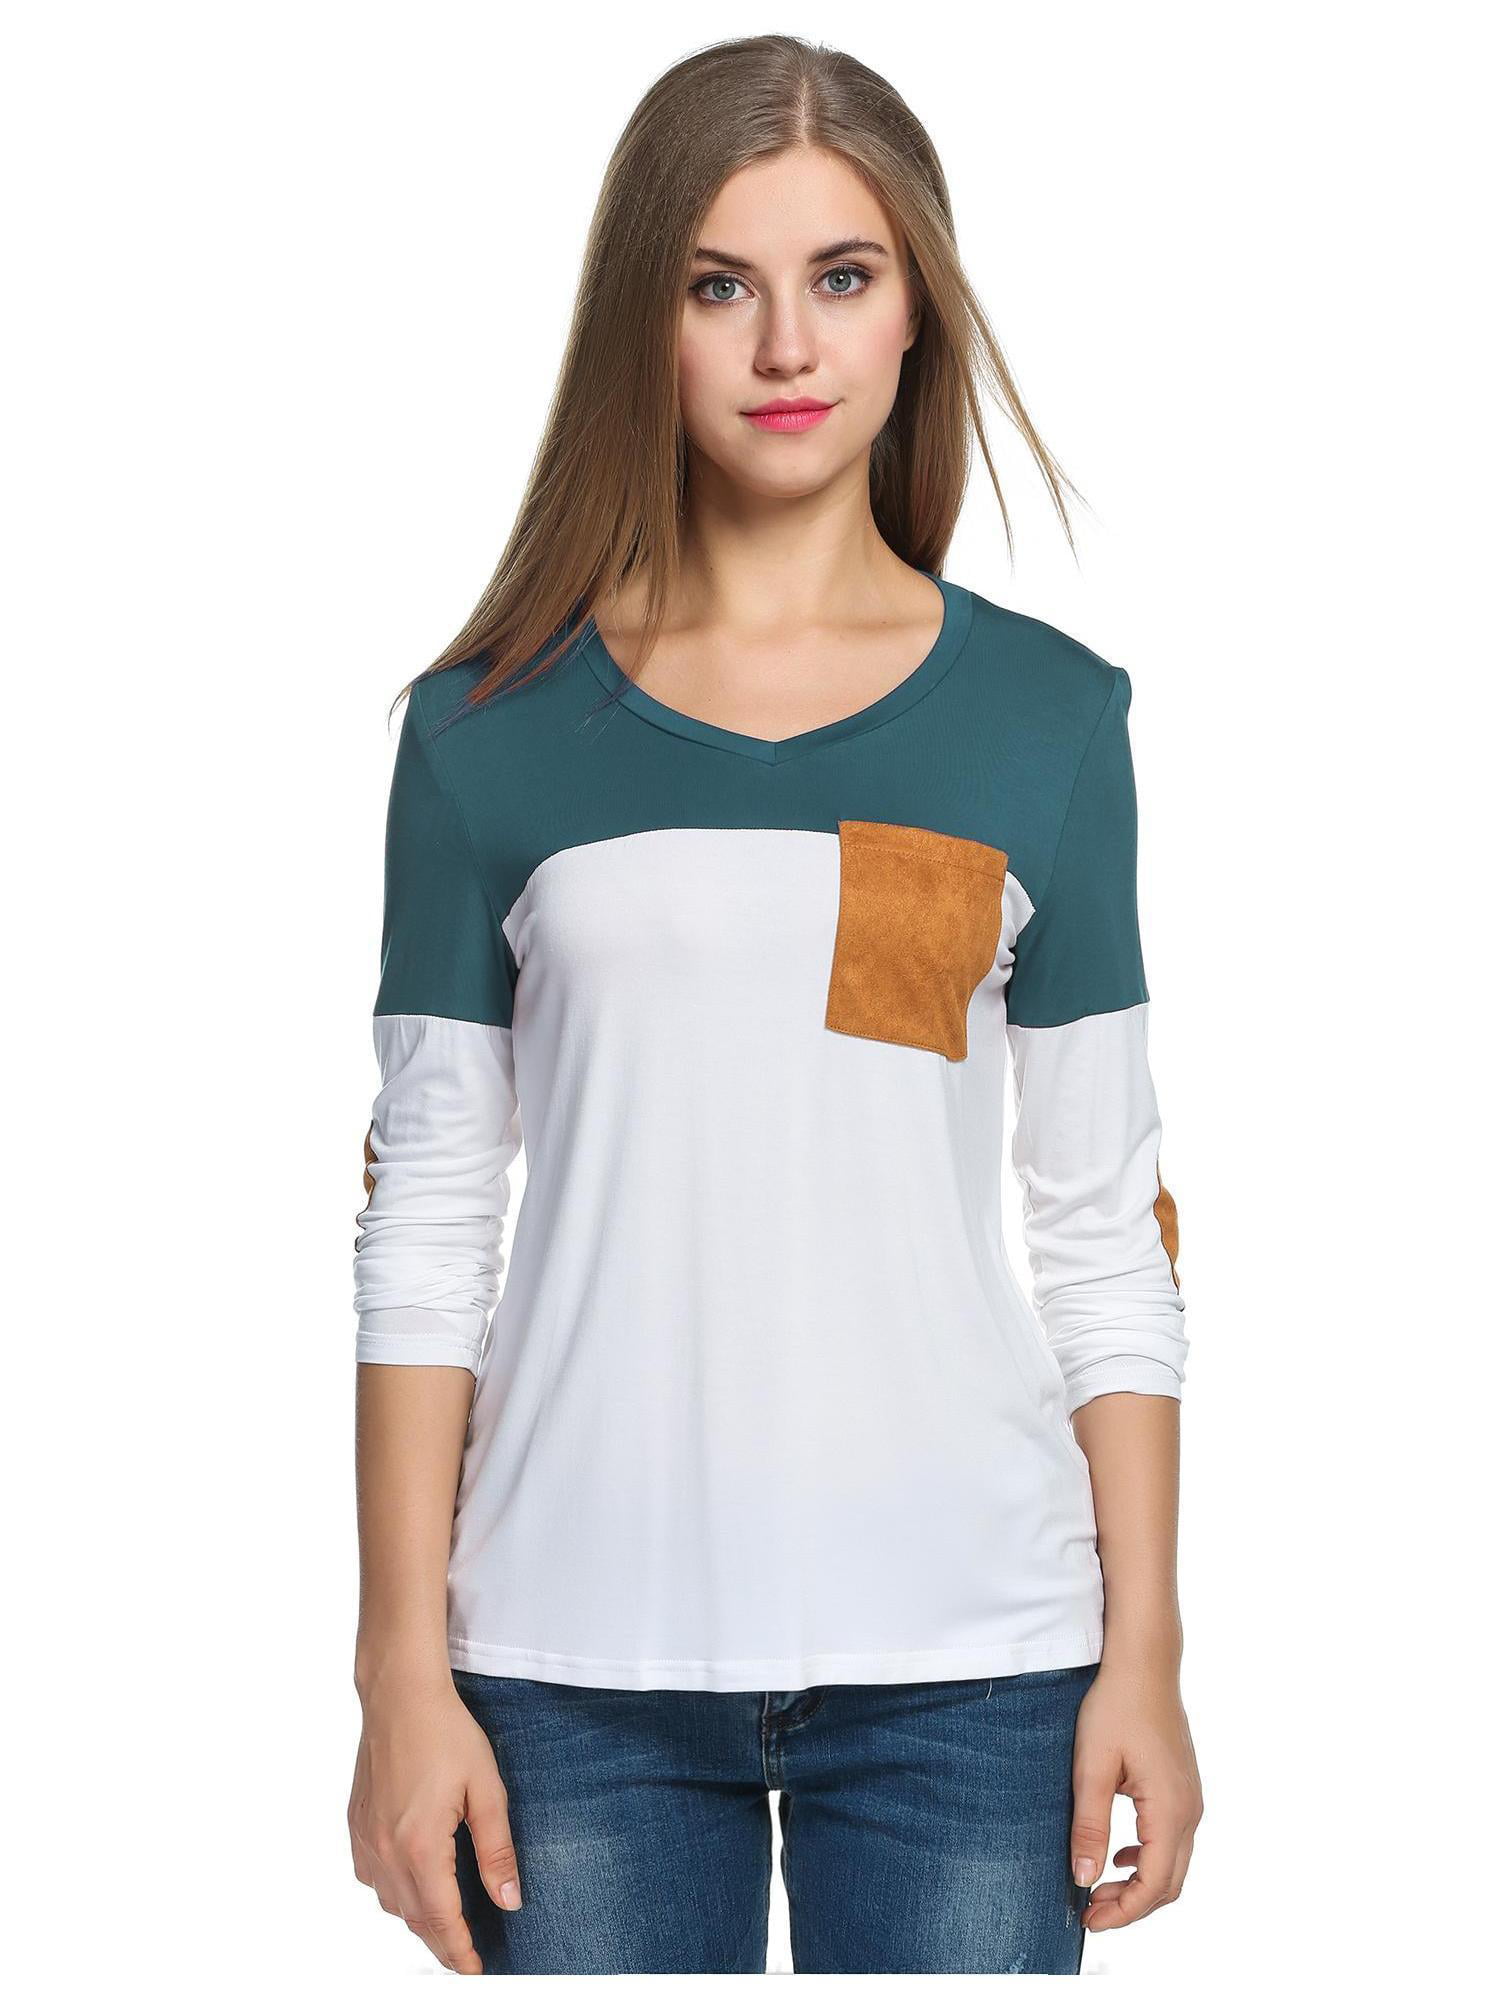 Womens Tops Long Sleeve Patchwork Loose T Shirts Blouses Sweatshirts Casual Tunic Tops Clearance for Women 